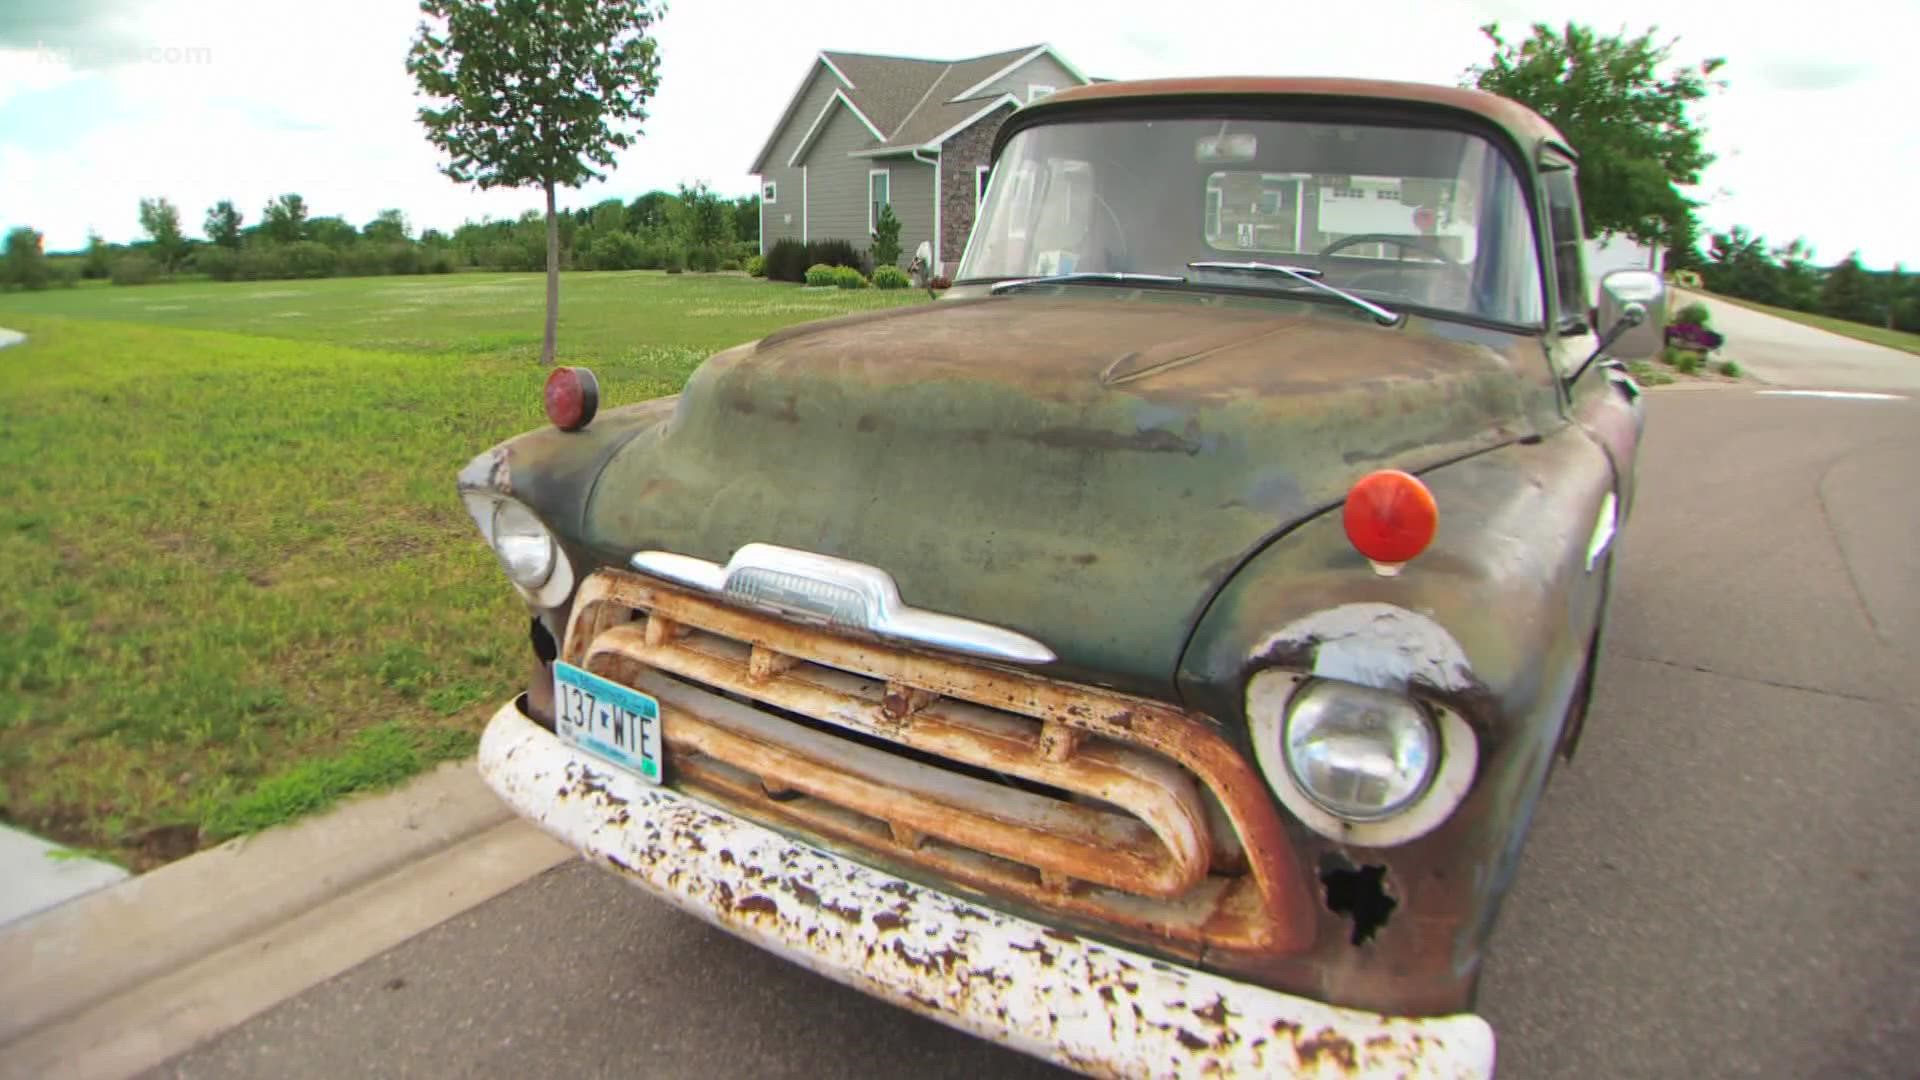 Bob Sportal bought the old truck in his 20s and drove it to work every day until he retired.